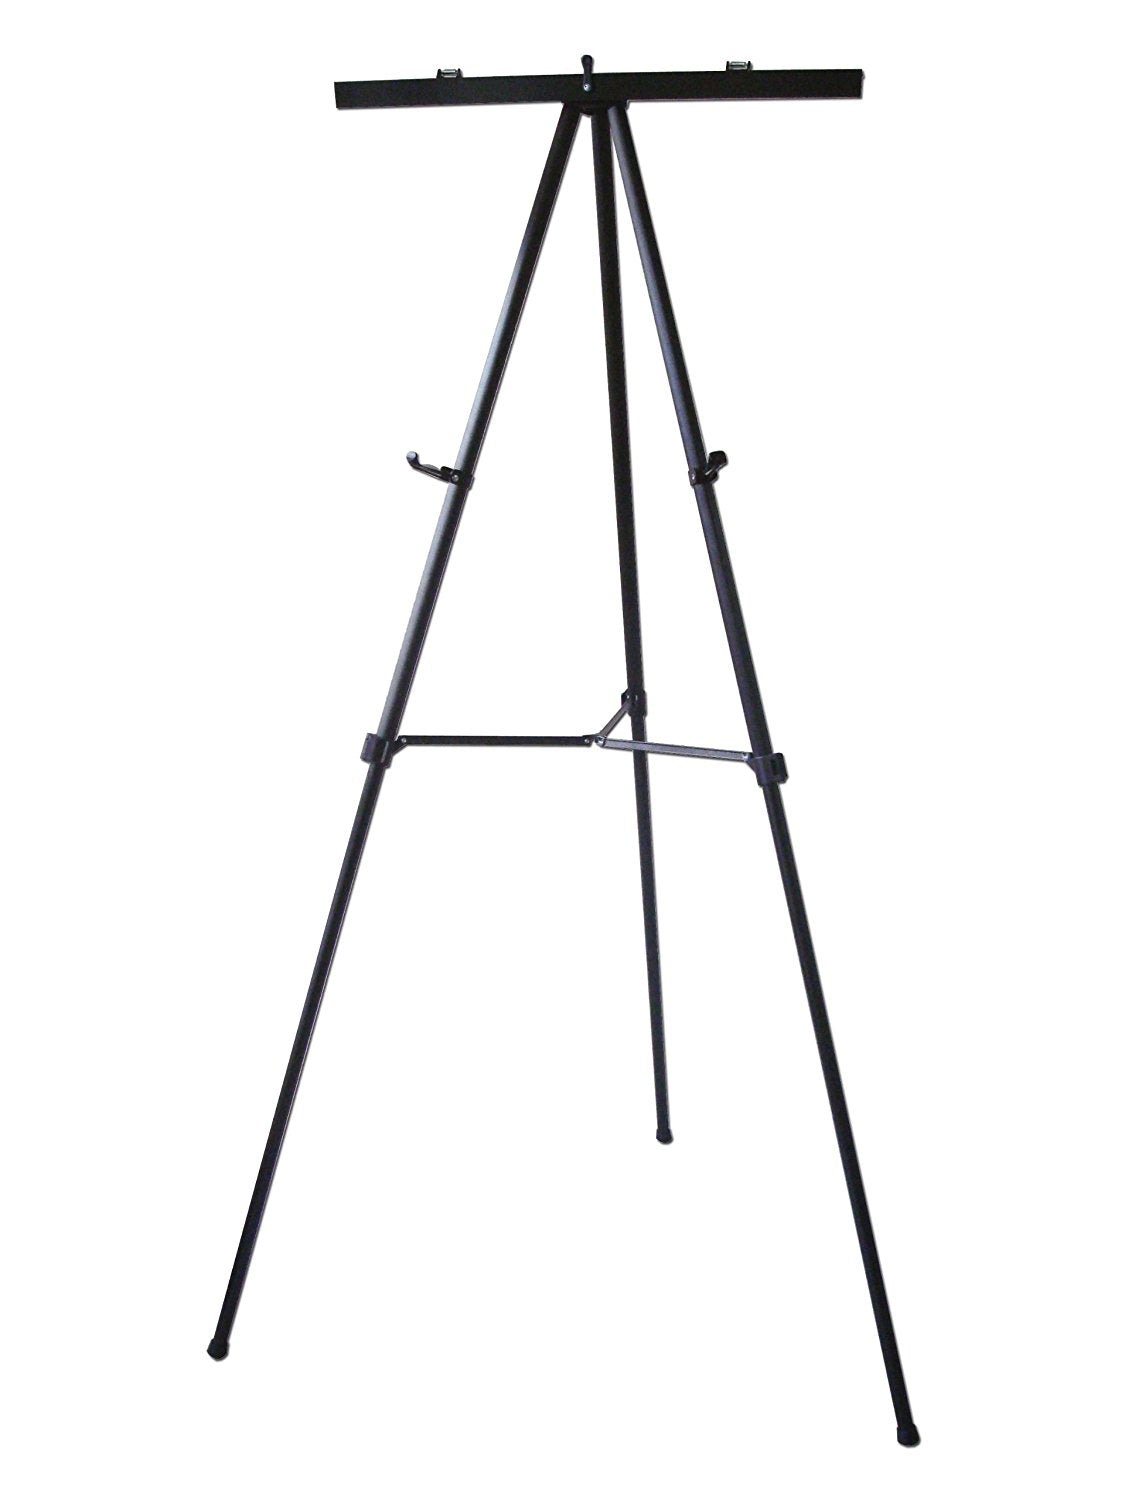 Lightweight Aluminum Flip-Chart Presentation Easel, 70 Inches, Black. Made of strong, lightweight aluminum, with a satin anodized finish. Shown with easel pad holder.